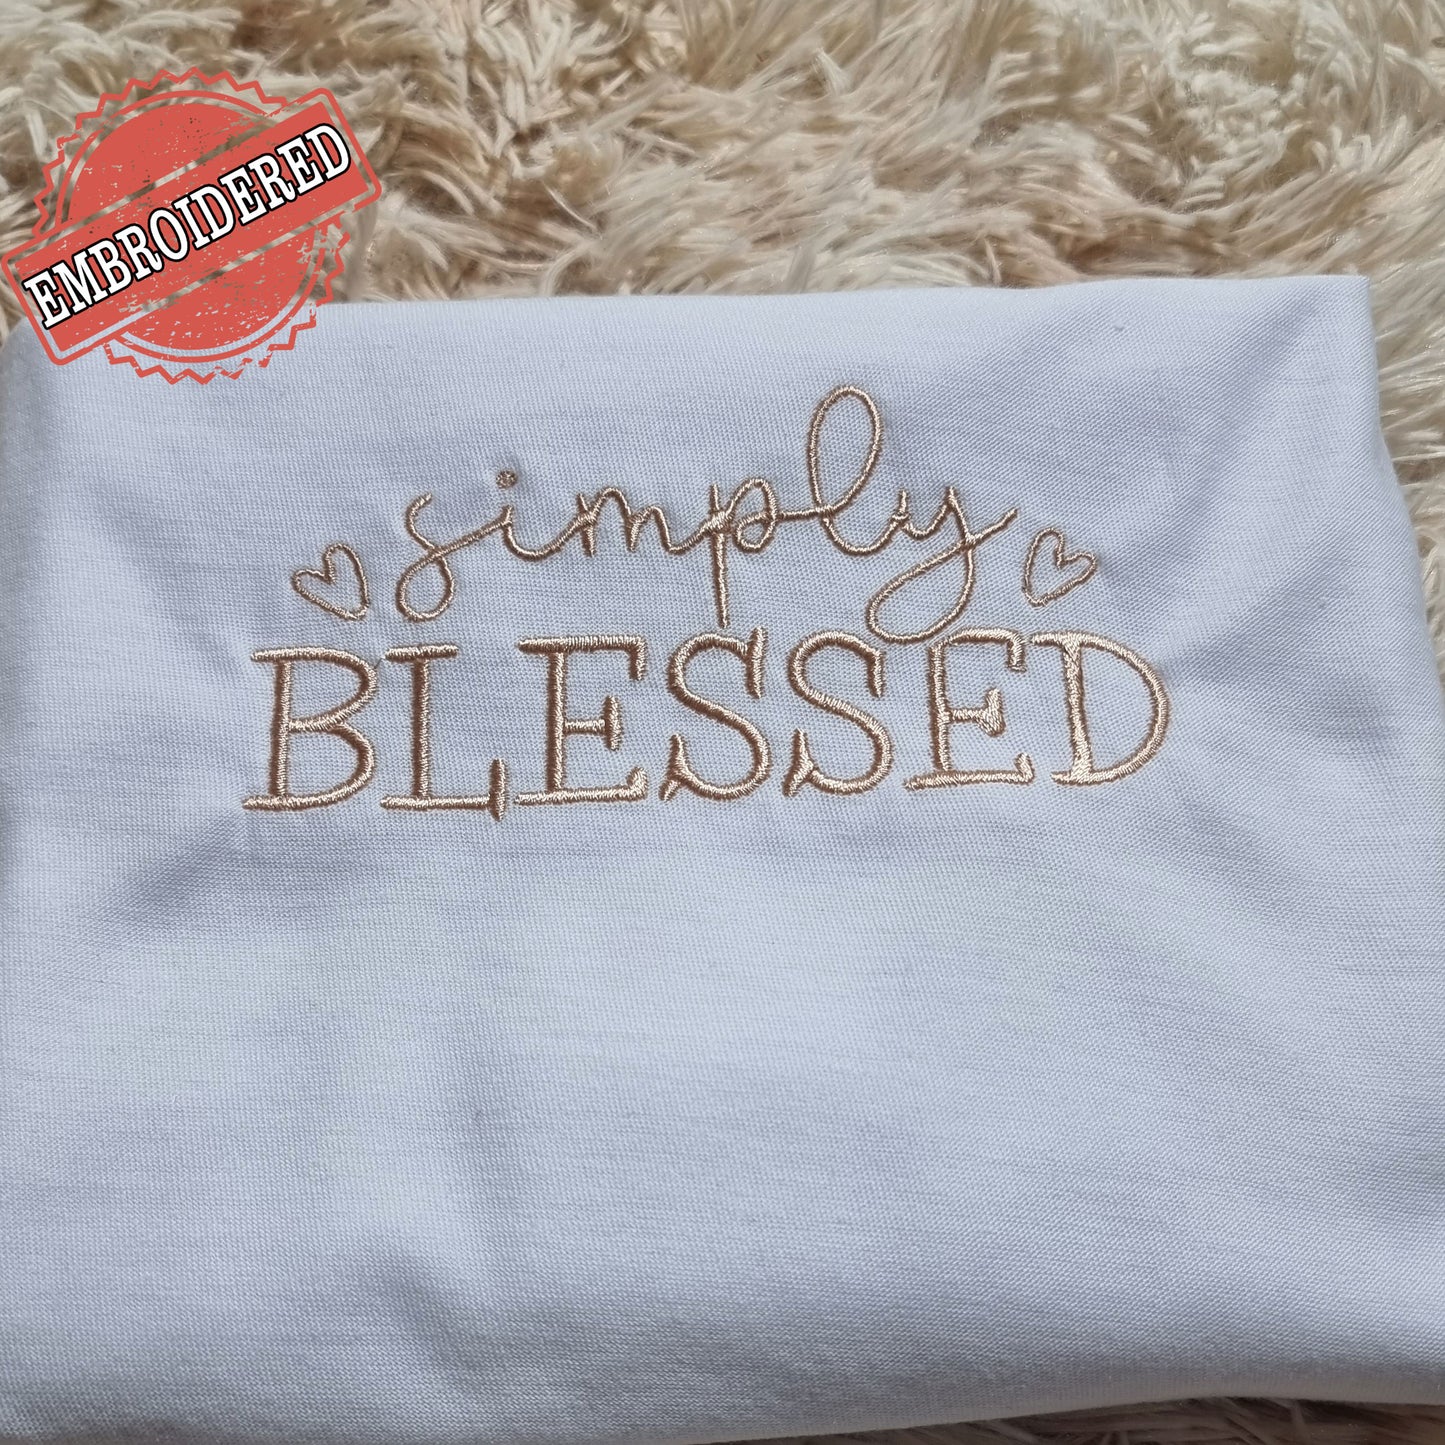 Embroidered T-shirt Unisex Tees - Various Religious Designs Shirt Embroidery for Men and Women